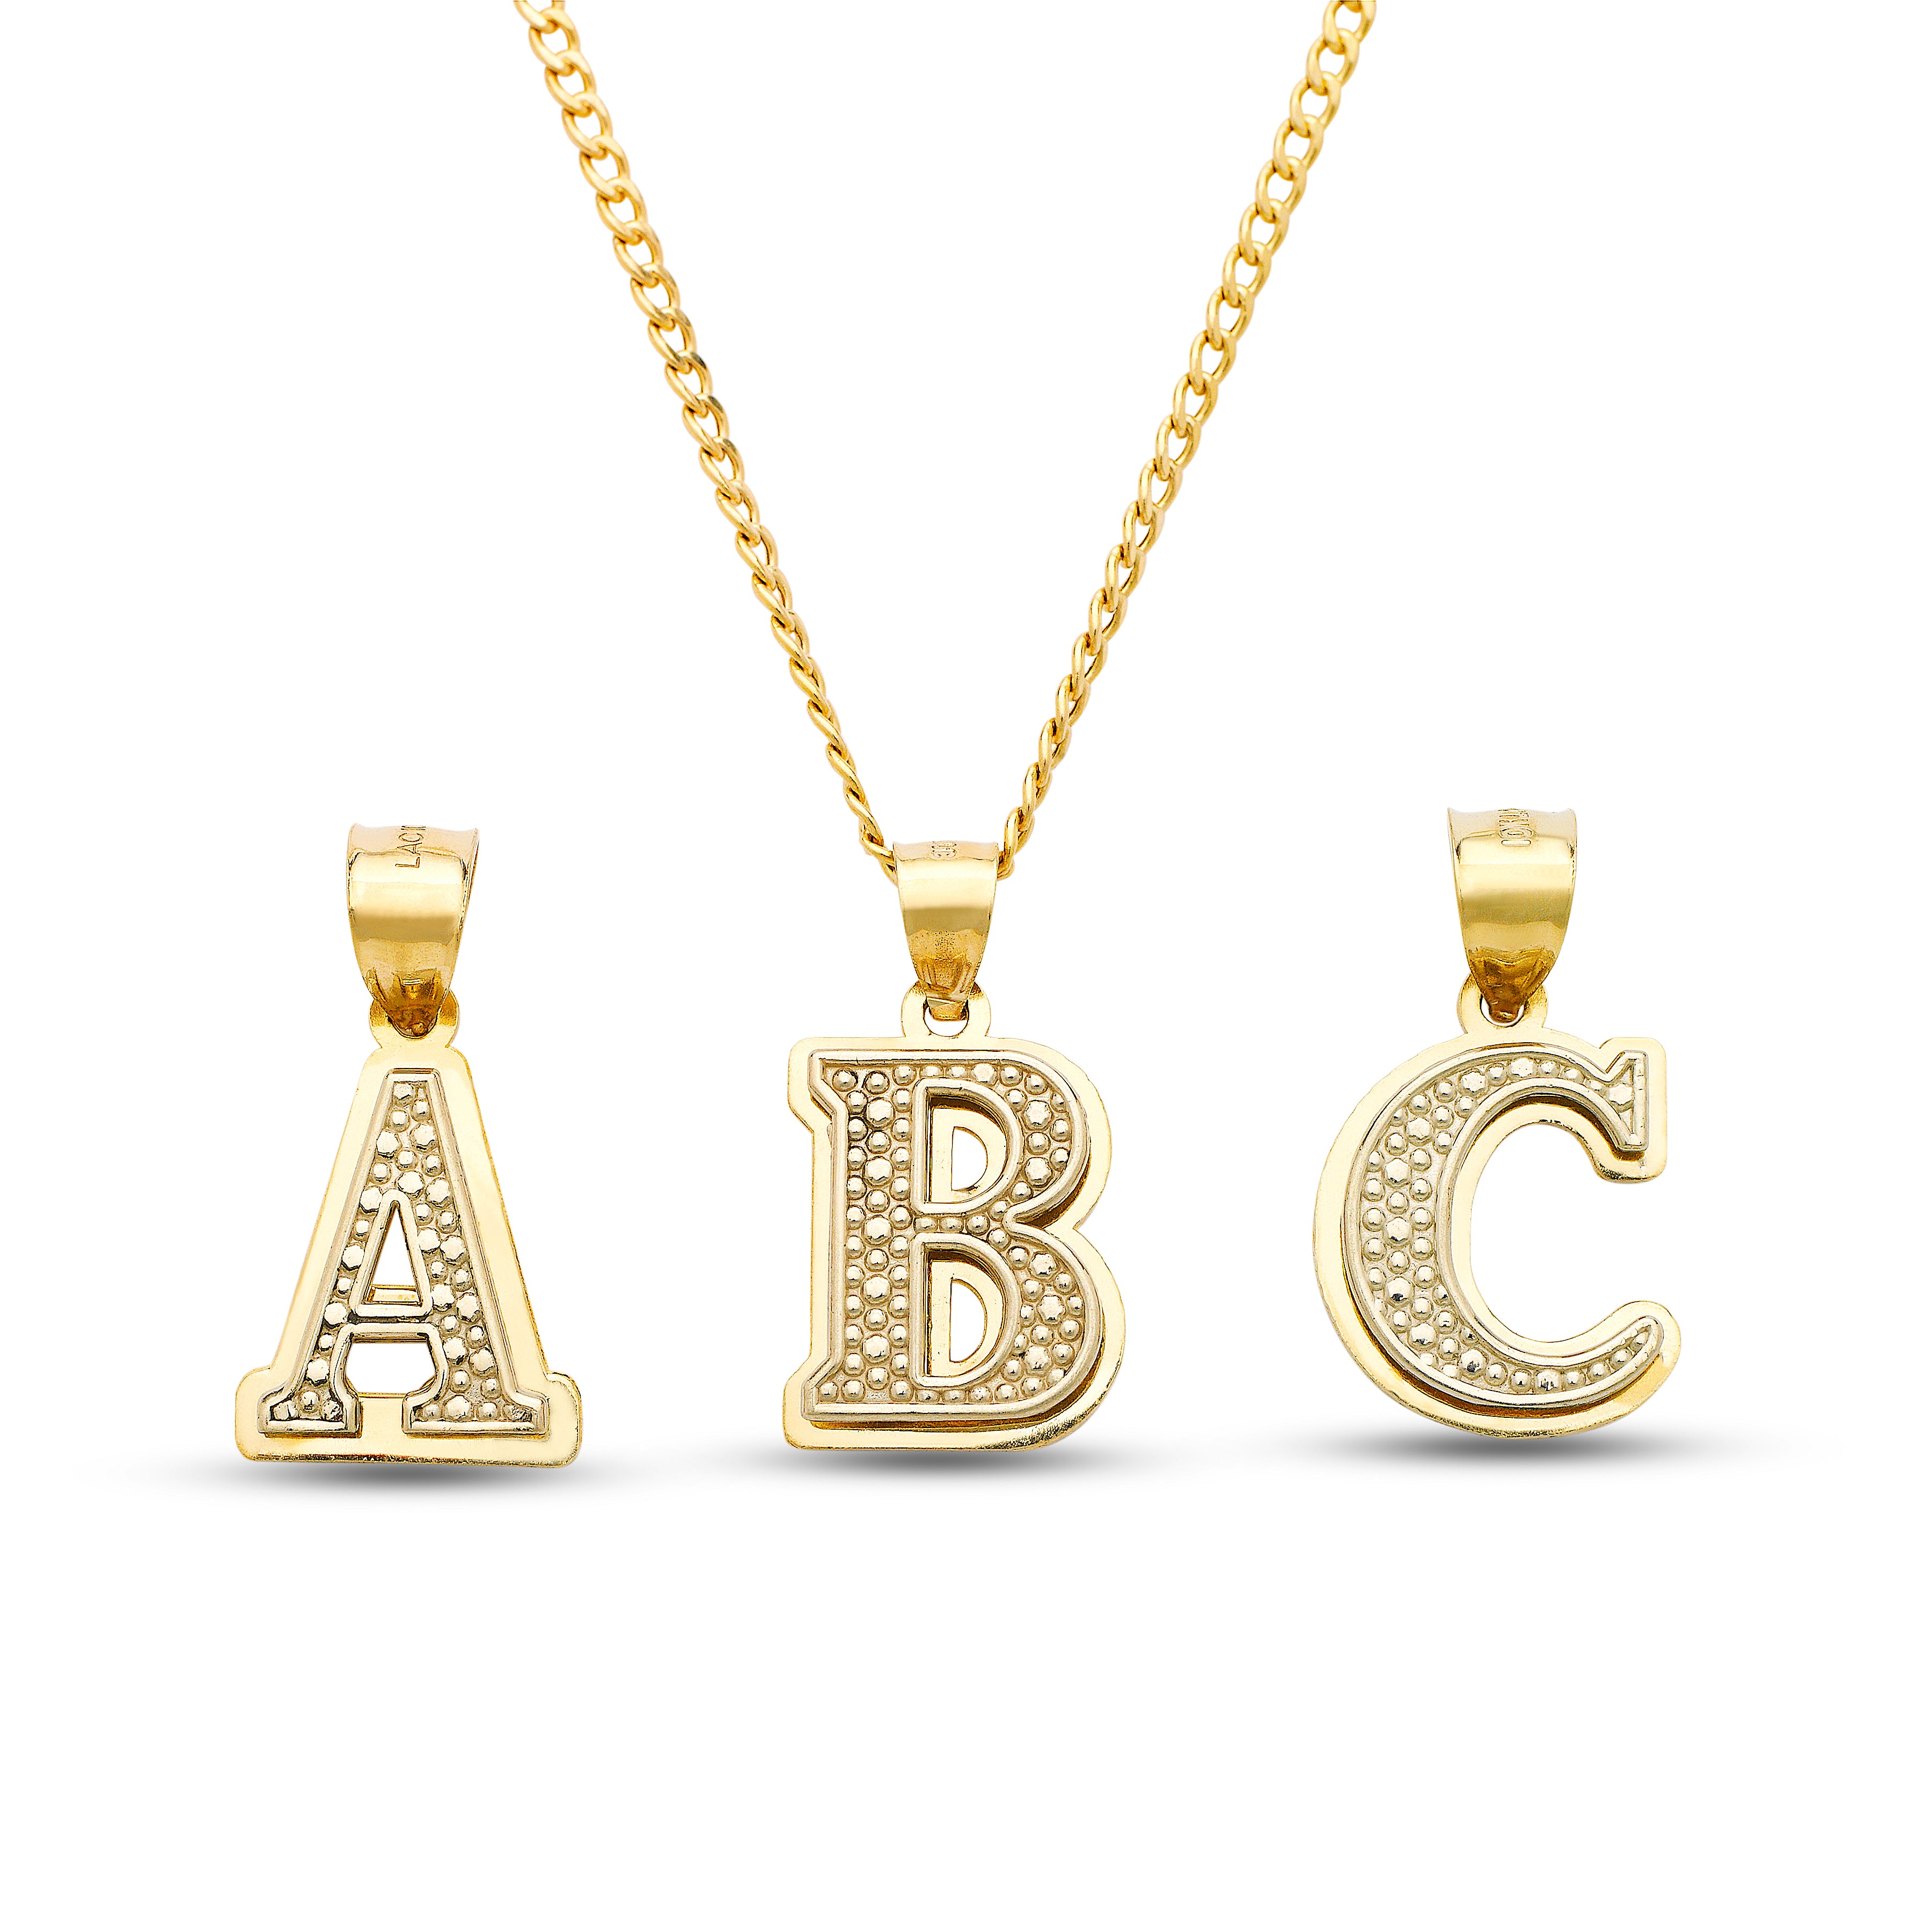 14K YELLOW GOLD FLOATING BLOCK INITIAL NECKLACE | Patty Q's Jewelry Inc